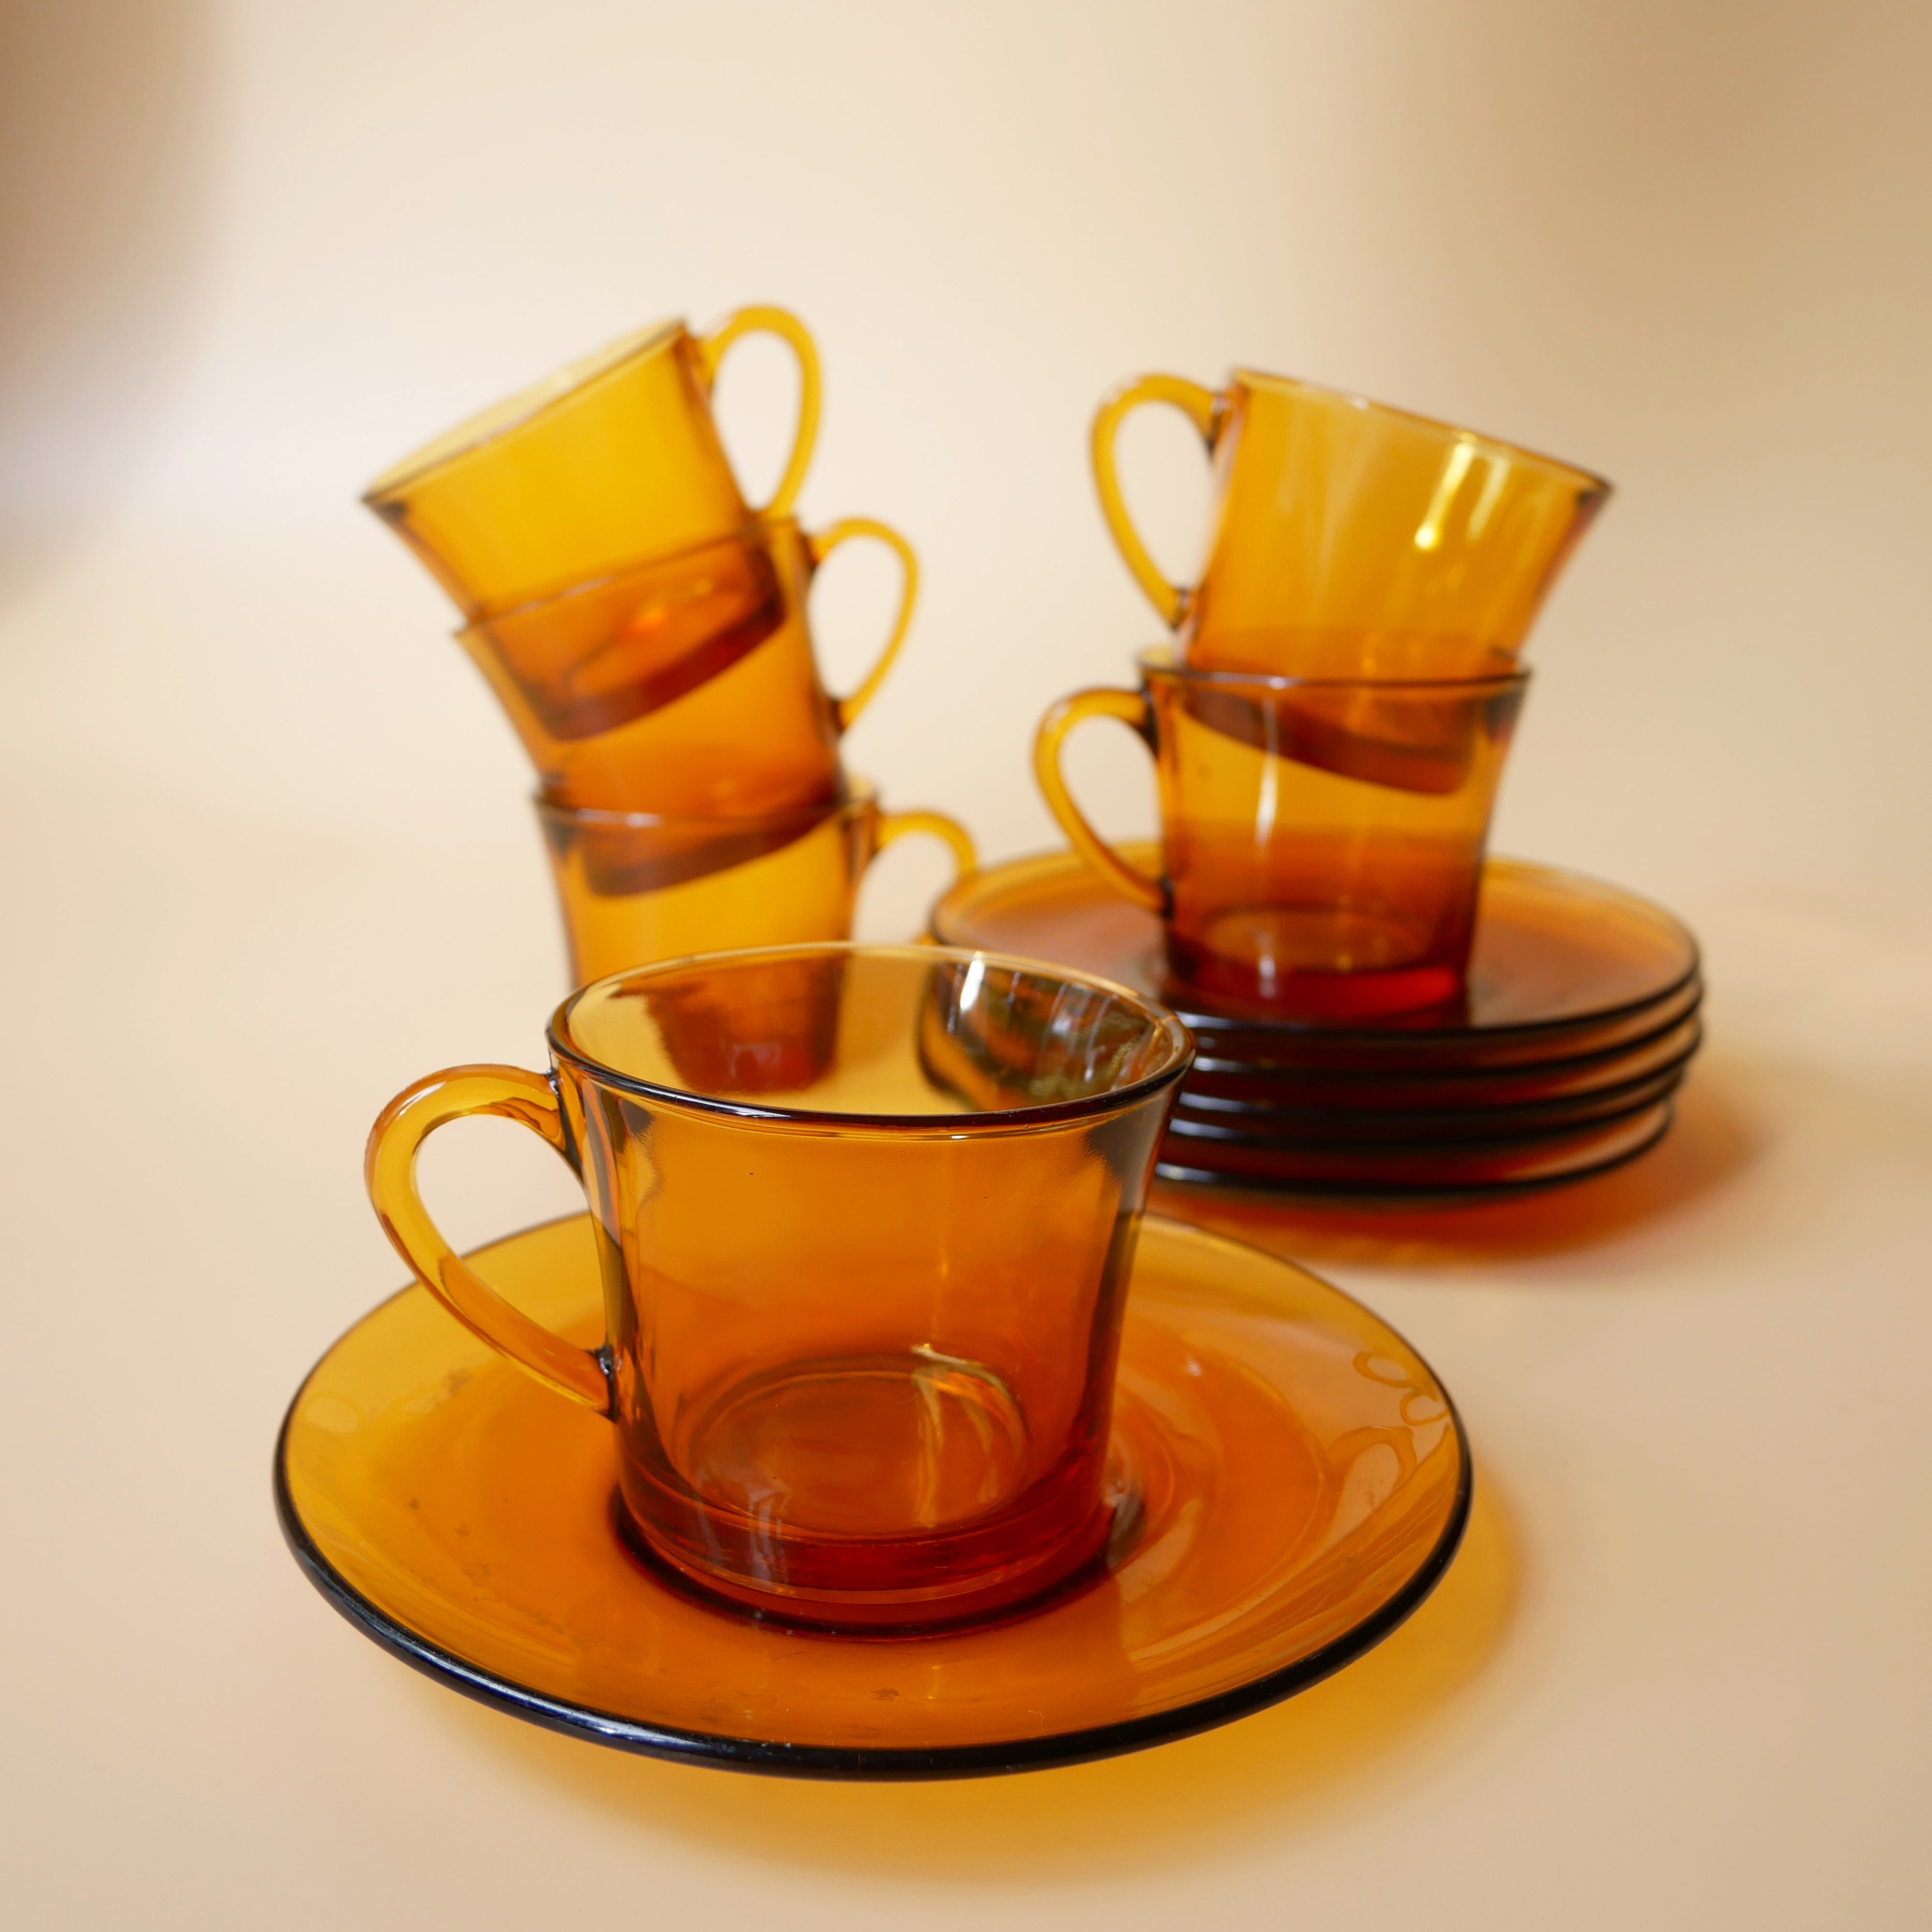 1970s FRENCH SET OF 6 AMBER GLASS ESPRESSO CUP AND SAUCER